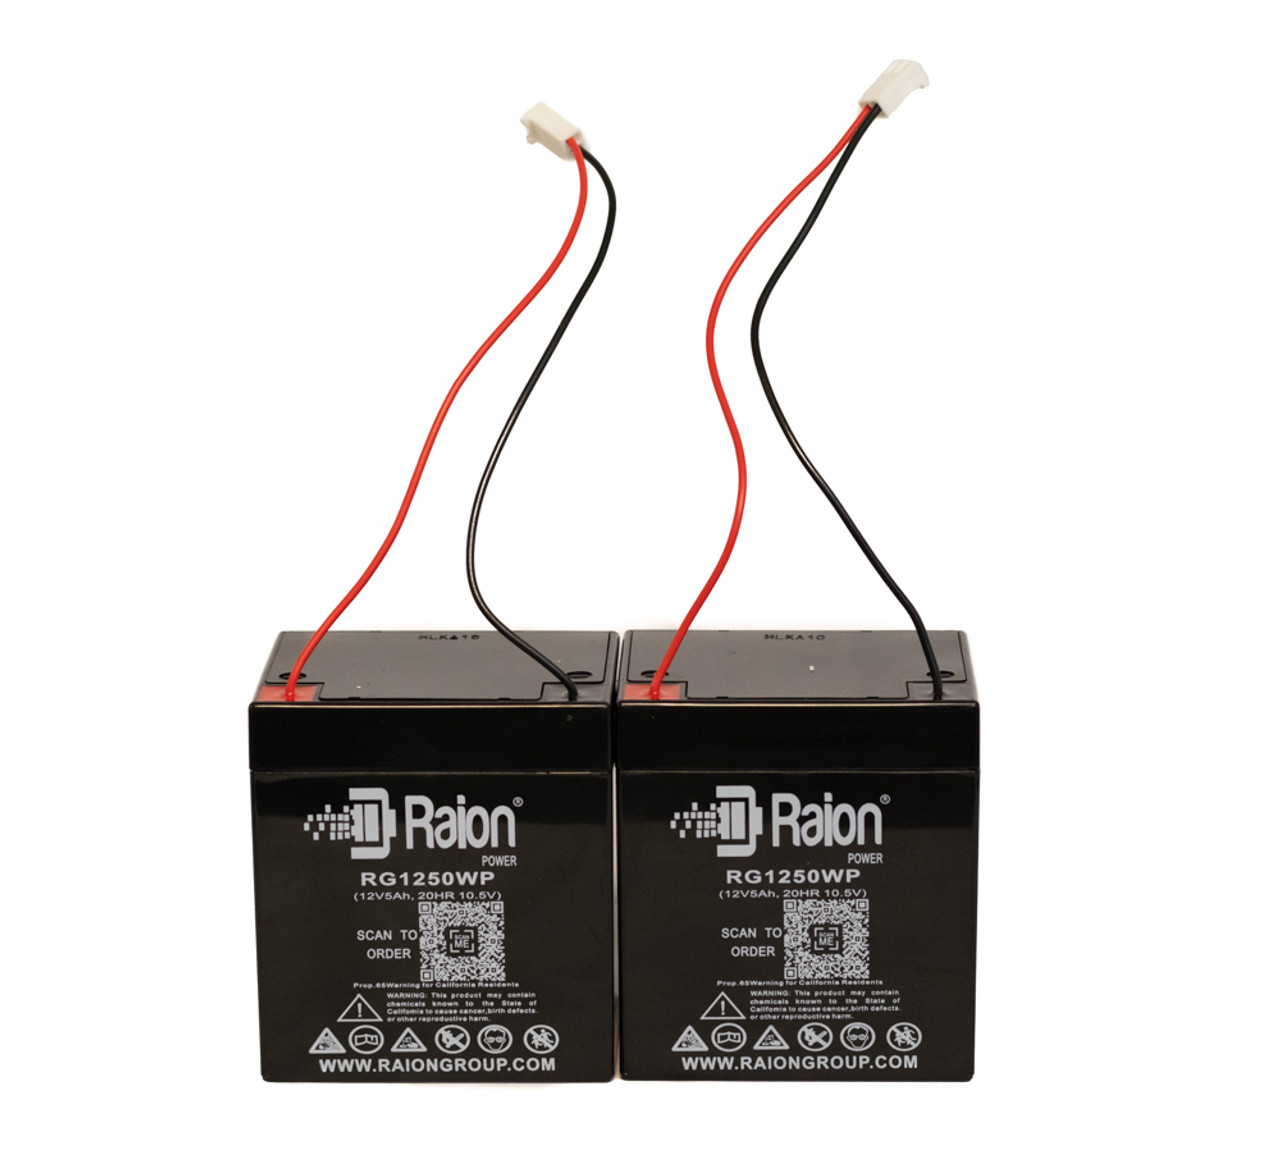 Raion Power RG1250WP Replacement Garage Door Battery for LiftMaster 2500 - (2 Pack)